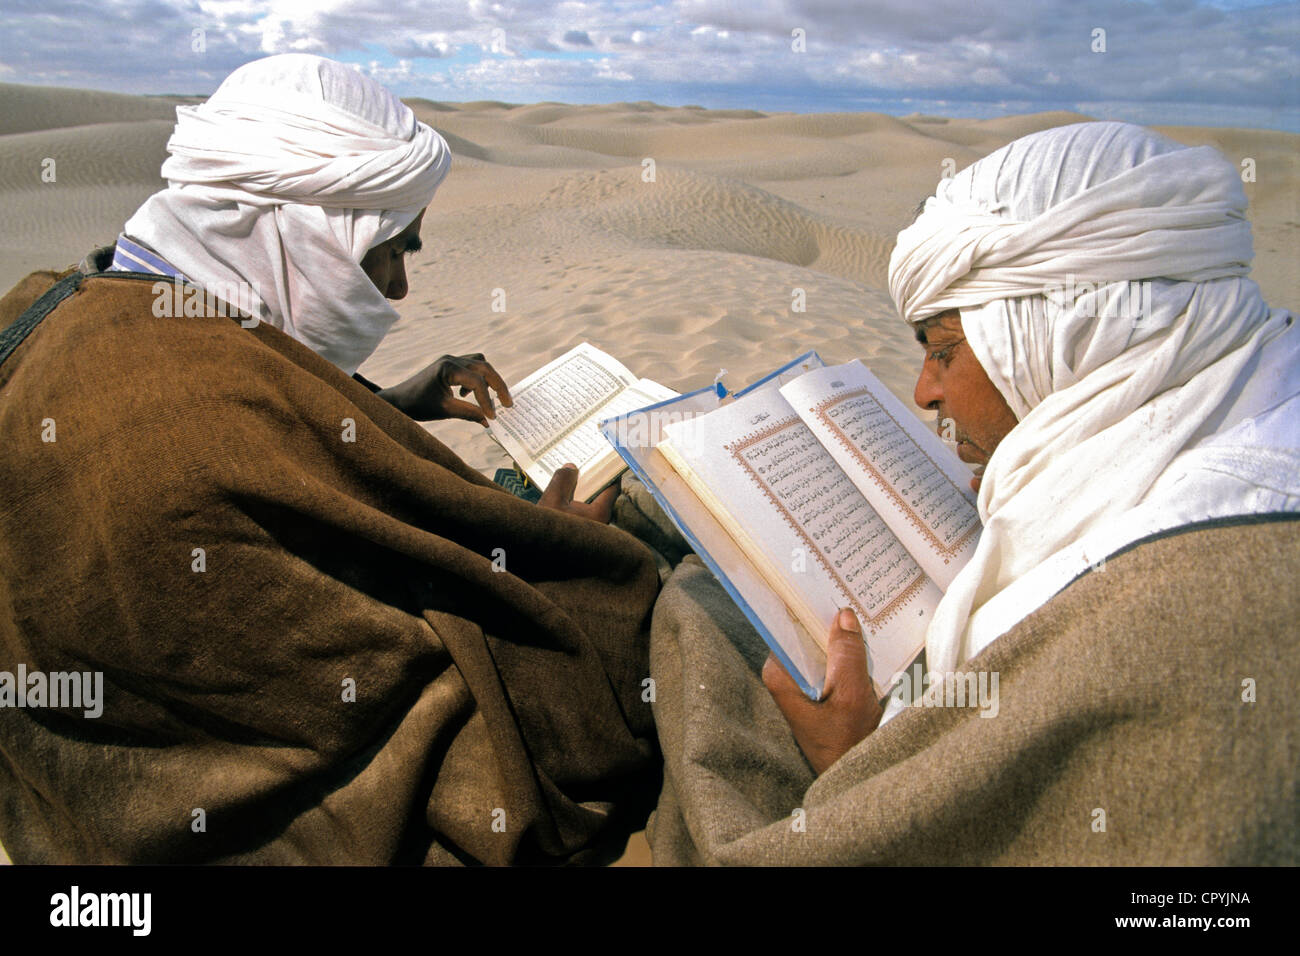 Tunisia, Kebili Governorate, Douz, according to ancestral customs, reading of the koran and sparring match in the desert Stock Photo